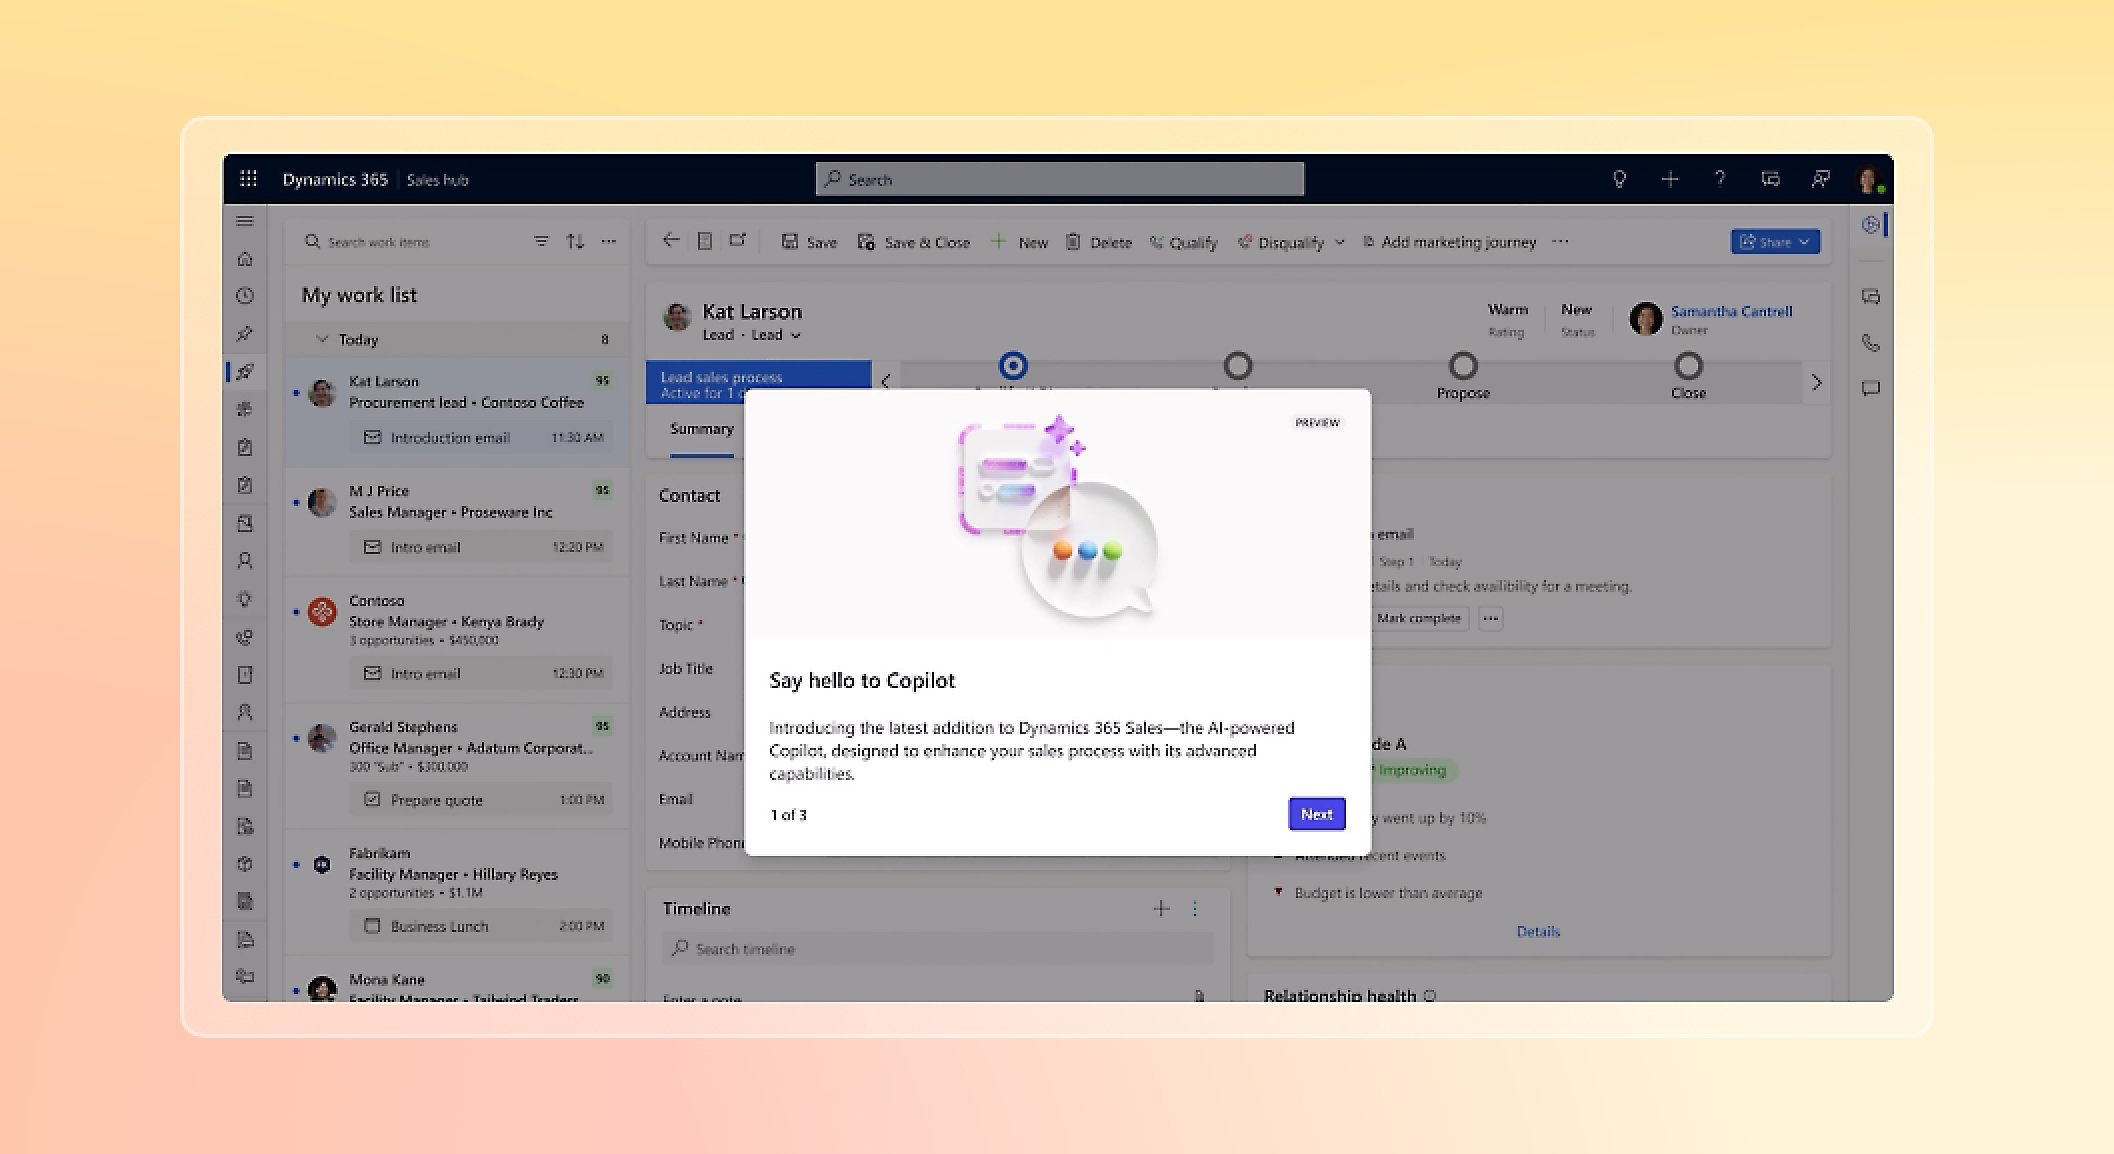 Window open for dynamics 365 and dialog box open for copilot